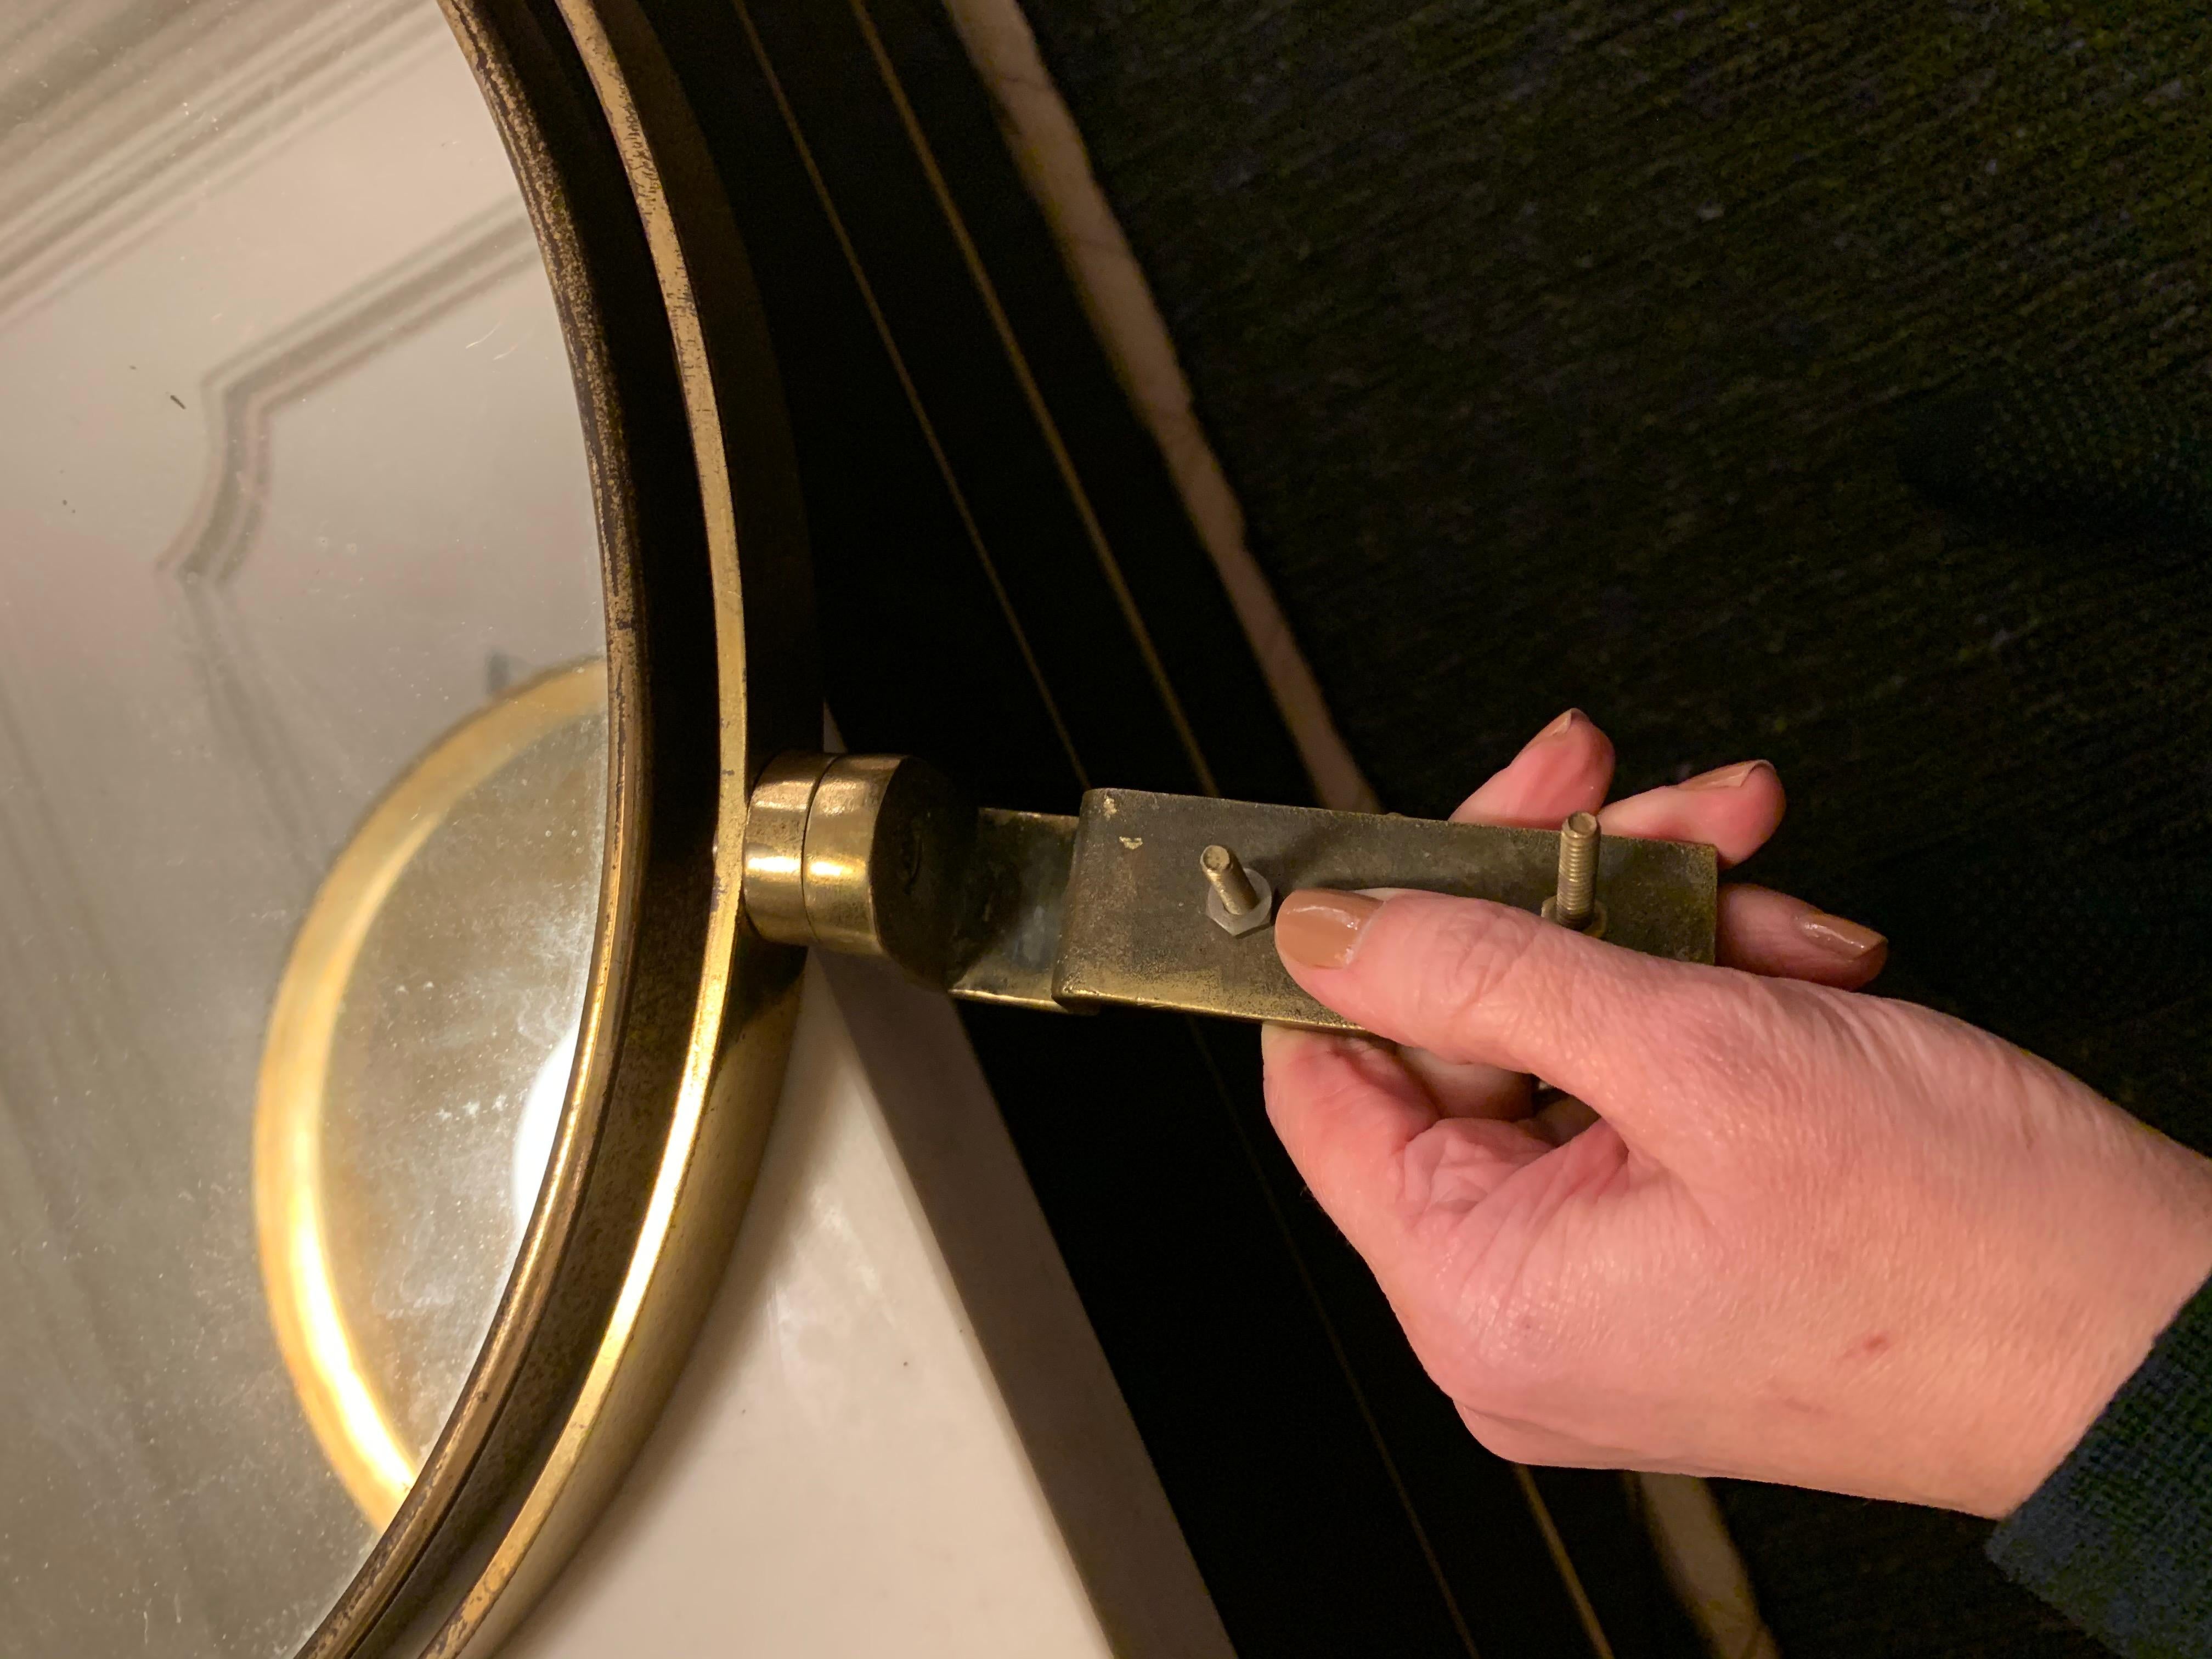 Tilting and swiveling vanity mirror, brass profile and mirrored glass. 1950s. Comes with hardware to attach to the vanity or desk. See pictures.